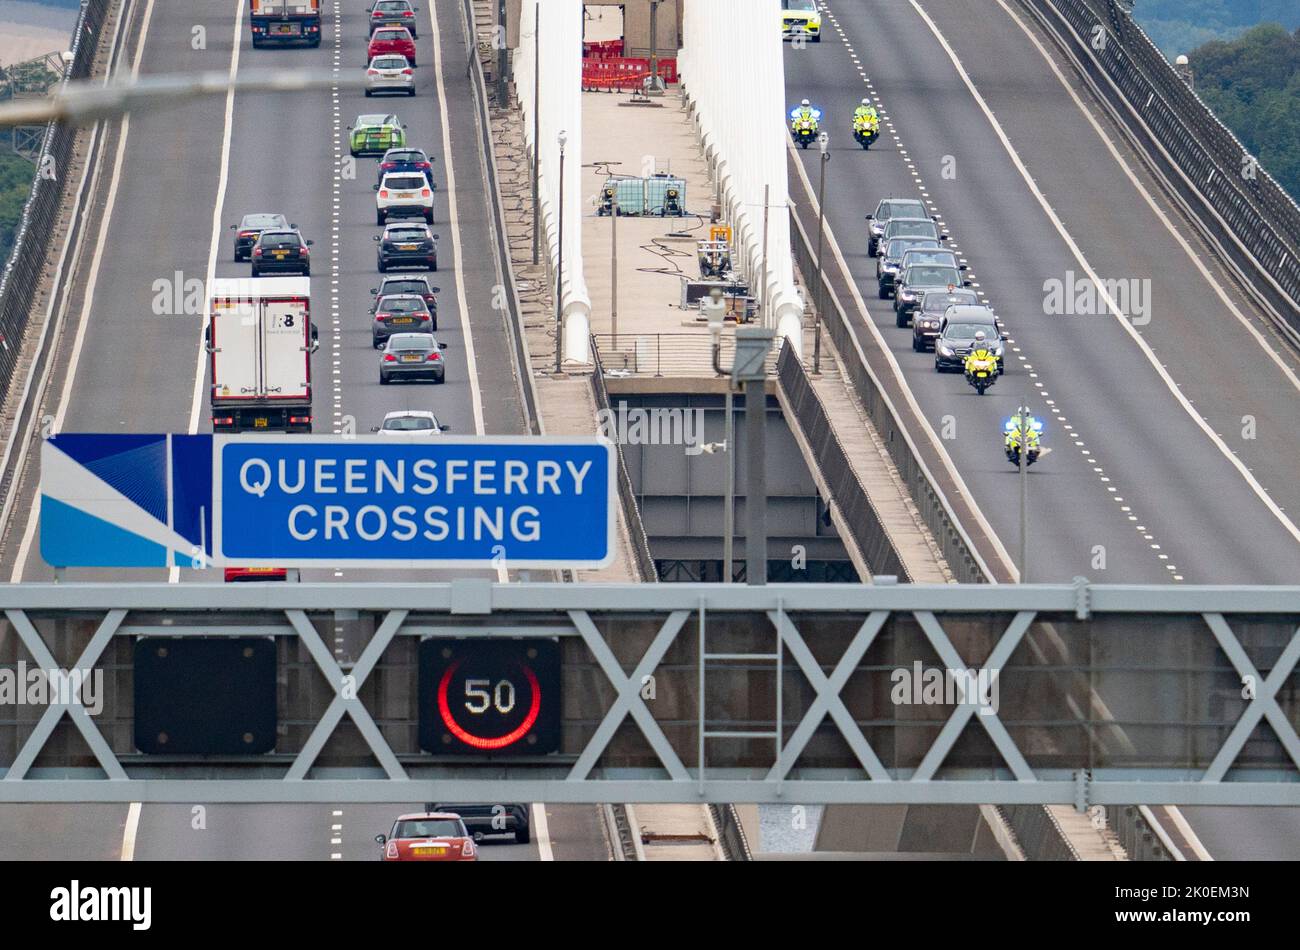 South Queensferry, Scotland, UK. 11th September 2022. Queen Elizabeth II coffin cortège drives across Queensferry Crossing Bridge at South Queensferry. The Queen opened this bridge almost 5 years to the day on 4 September 2017. Iain Masterton/Alamy Live News Stock Photo